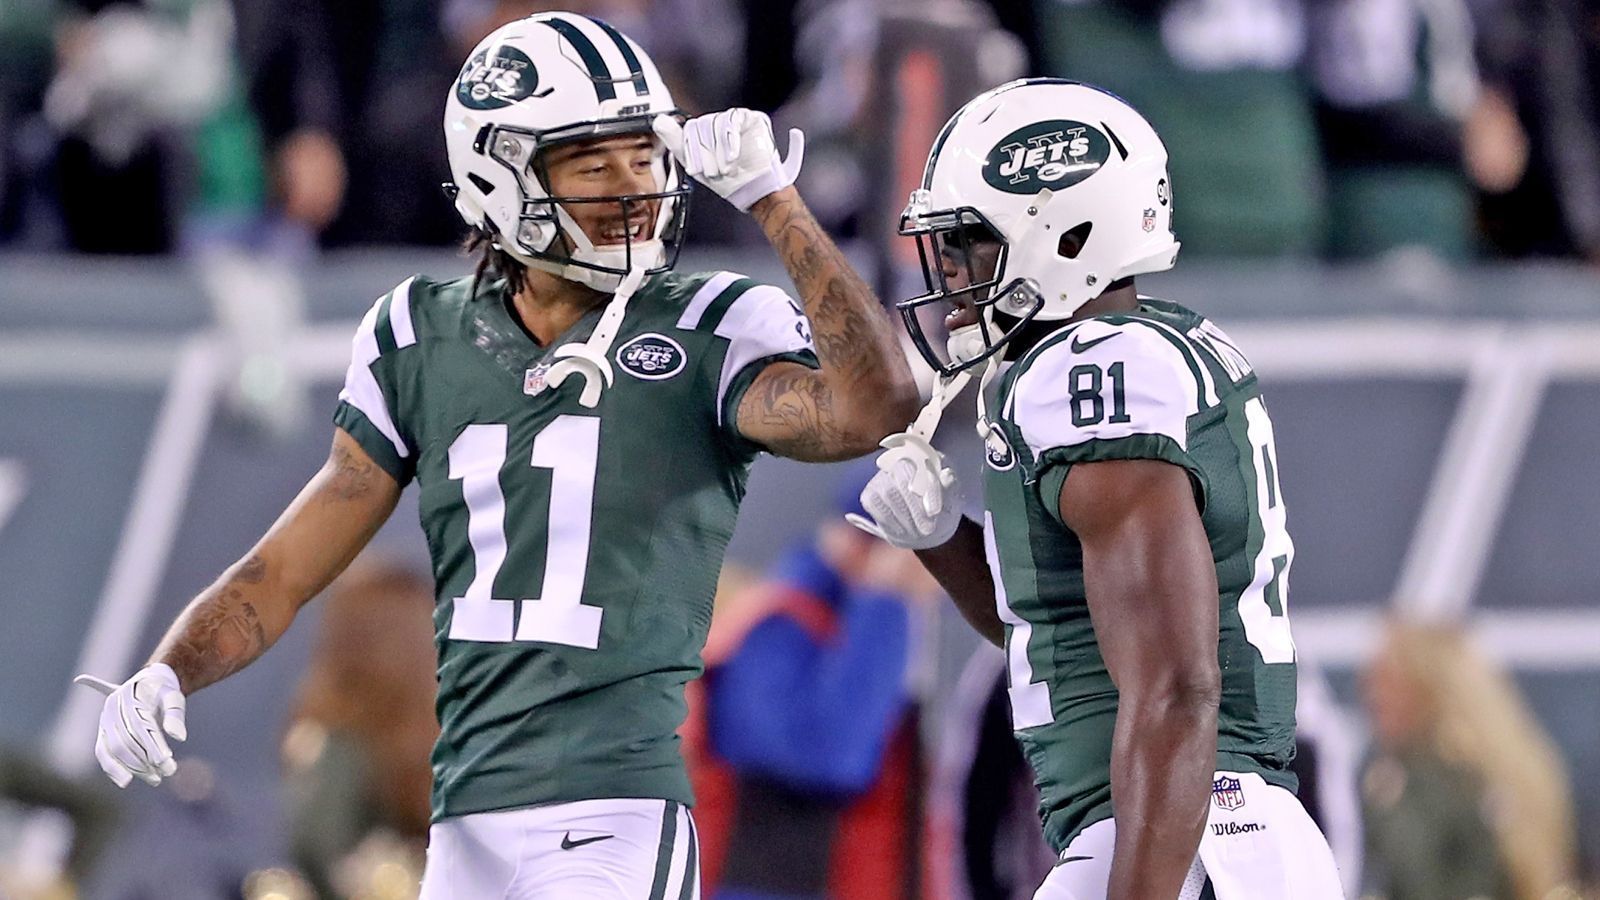 
                <strong>28. Platz: New York Jets</strong><br>
                Quincy Enunwa und Robby Anderson&#x2022; 786 Yards <br>&#x2022; 56 Receptions<br>&#x2022; 4 Touchdown<br>
              